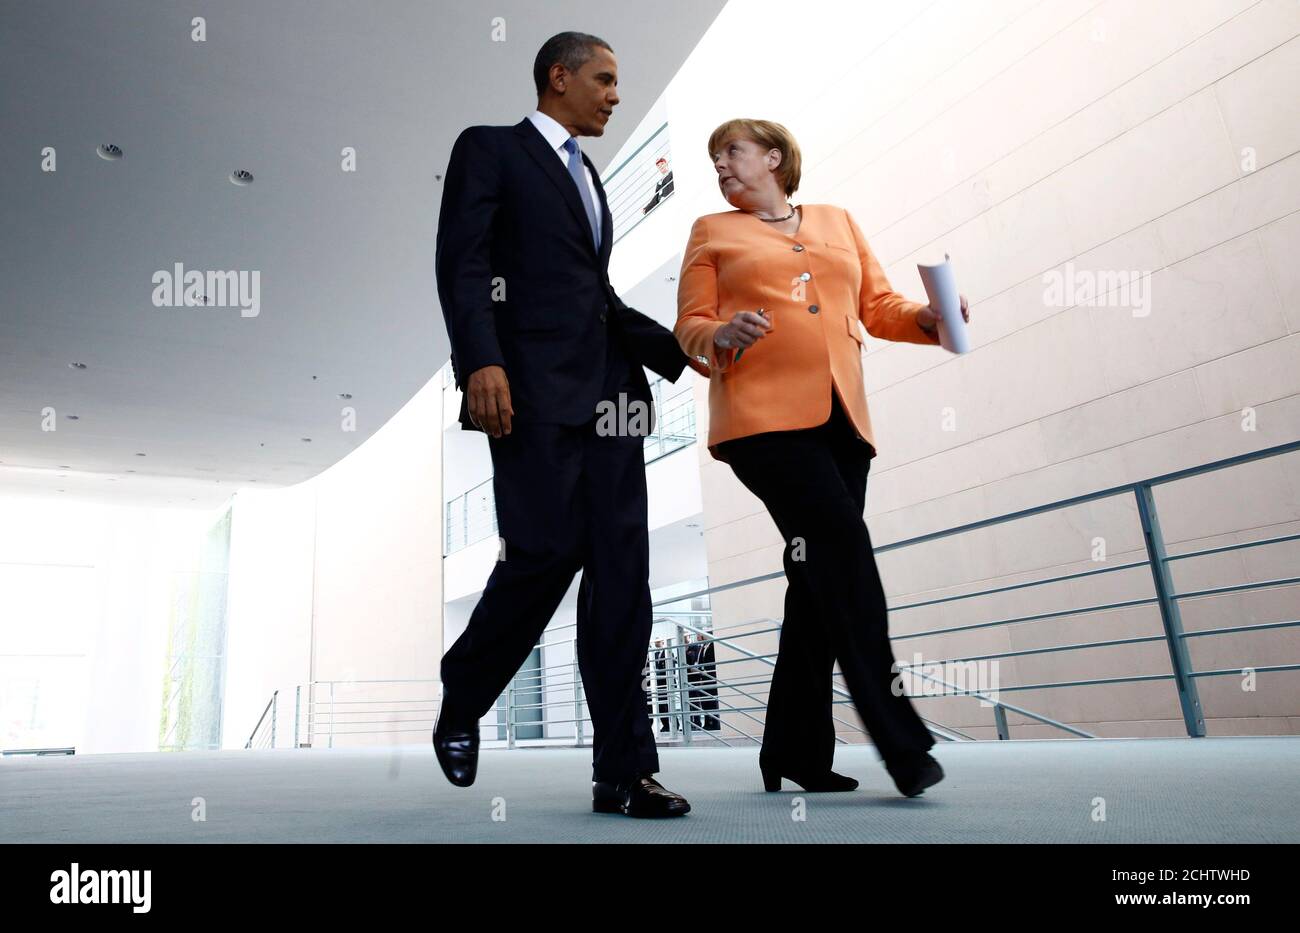 U.S. President Barack Obama and German Chancellor Angela Merkel (R) make their way to a news conference at the Chancellery in Berlin June 19, 2013. Obama will unveil plans for a sharp reduction in nuclear warheads in a landmark speech at the Brandenburg Gate on Wednesday that comes 50 years after John F. Kennedy declared 'Ich bin ein Berliner' in a defiant Cold War address.              REUTERS/Thomas Peter (GERMANY  - Tags: POLITICS) Stock Photo